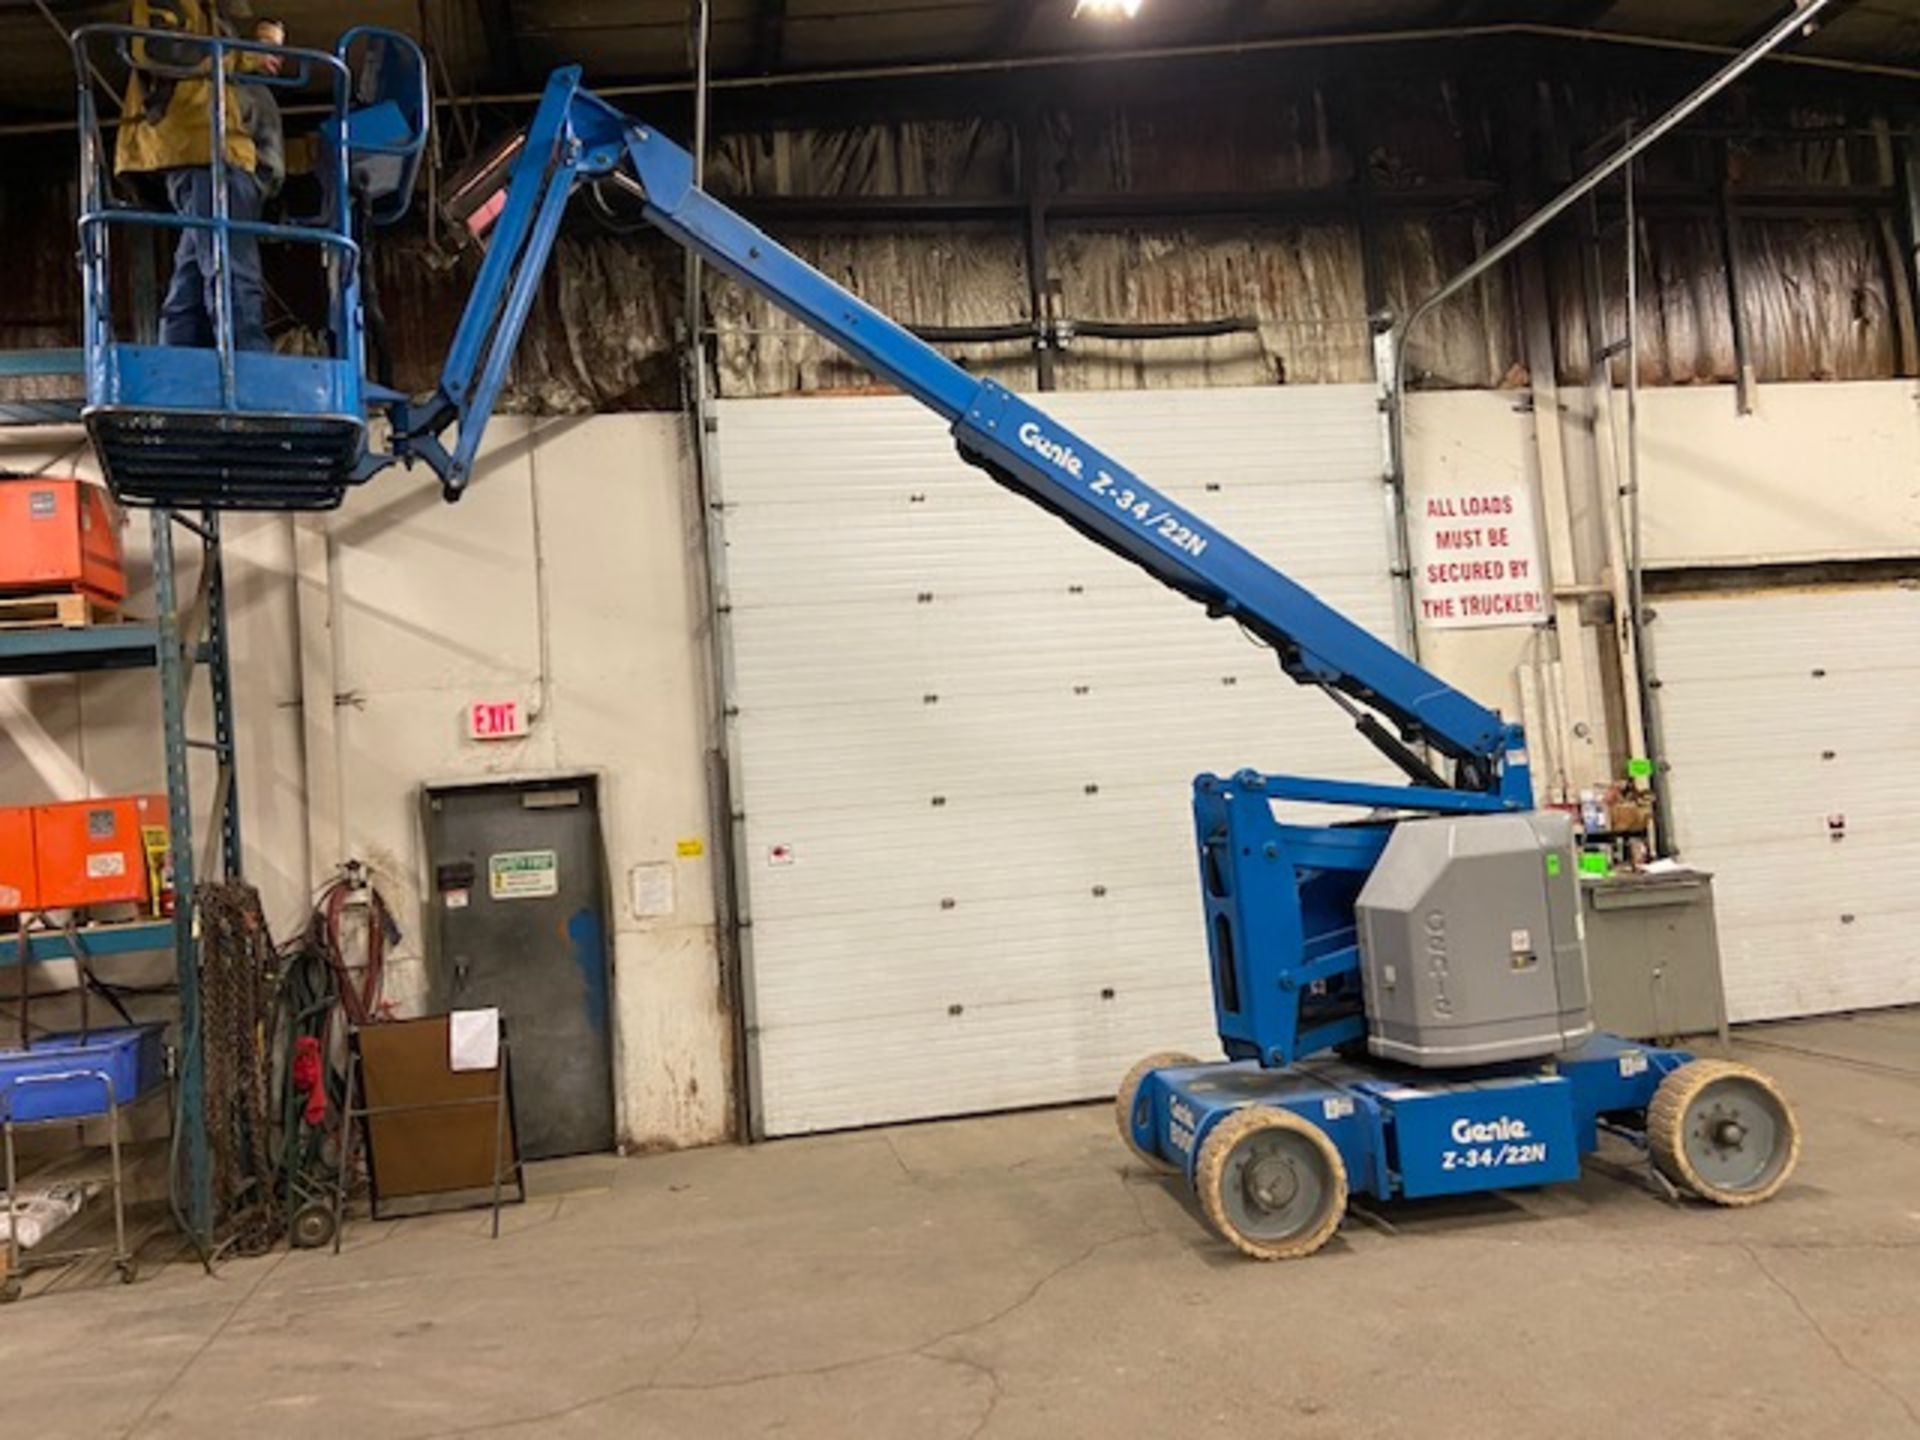 MINT 2005 Genie Boom Lift model Z-34/22N with 34' high with LOW hours ELECTRIC - Image 3 of 4